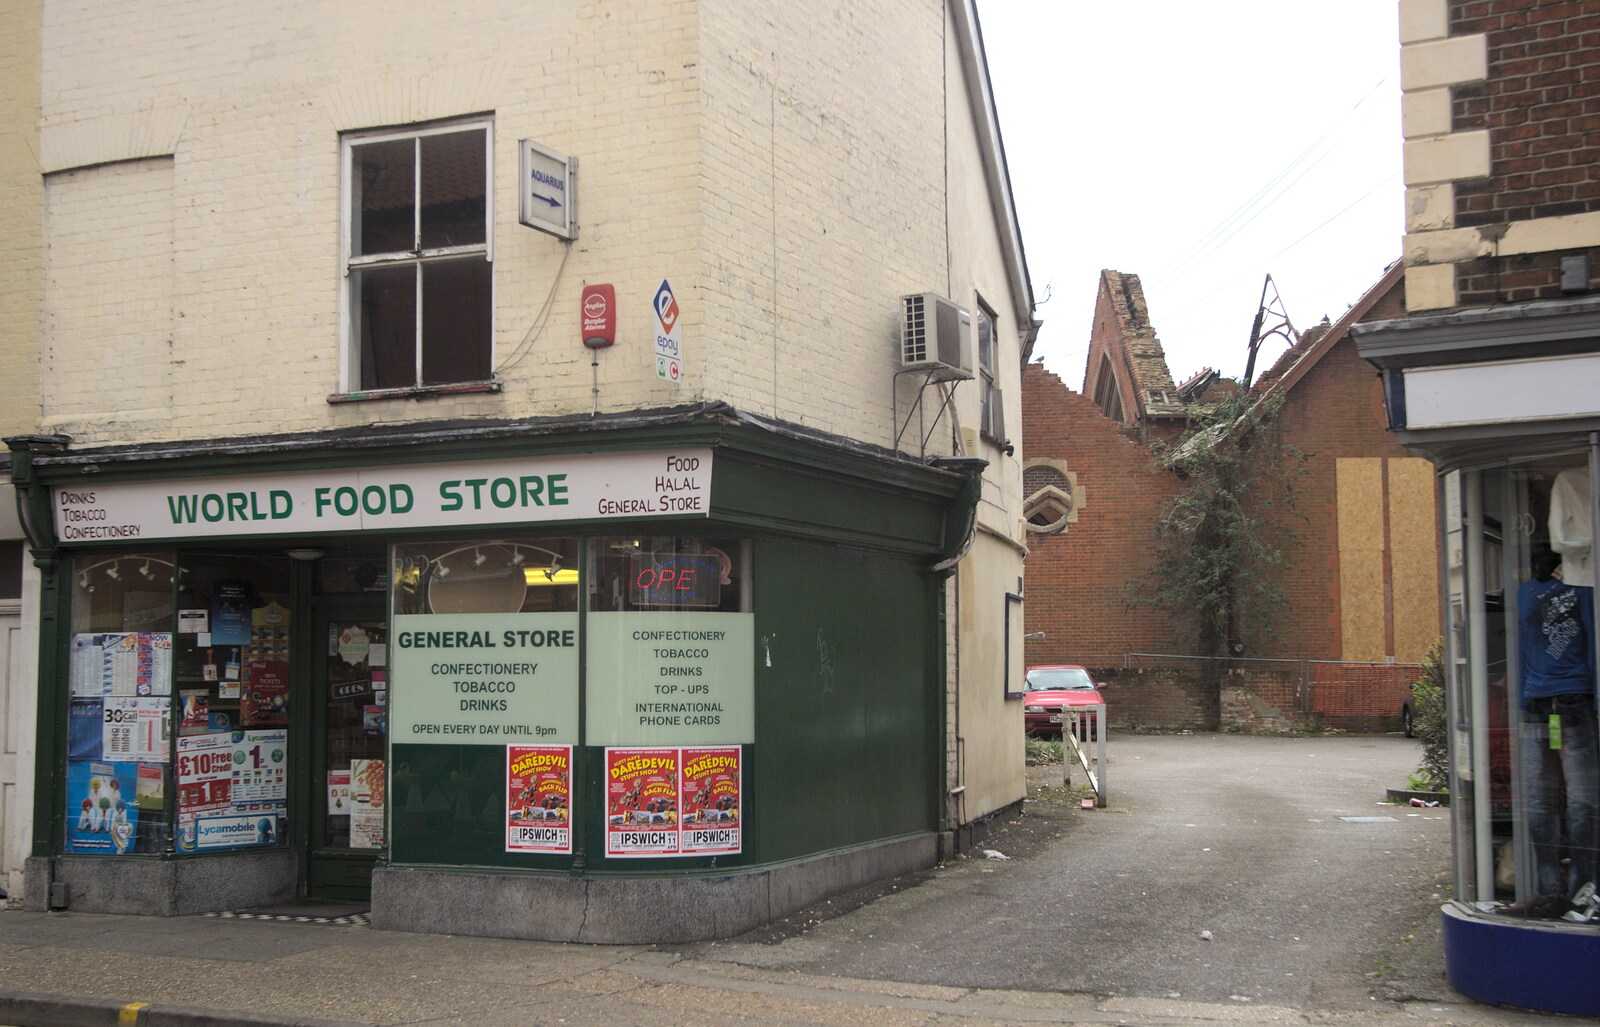 The 'World Food Store' on St Helen's Street from The Dereliction of Suffolk County Council, Ipswich, Suffolk - 3rd April 2012